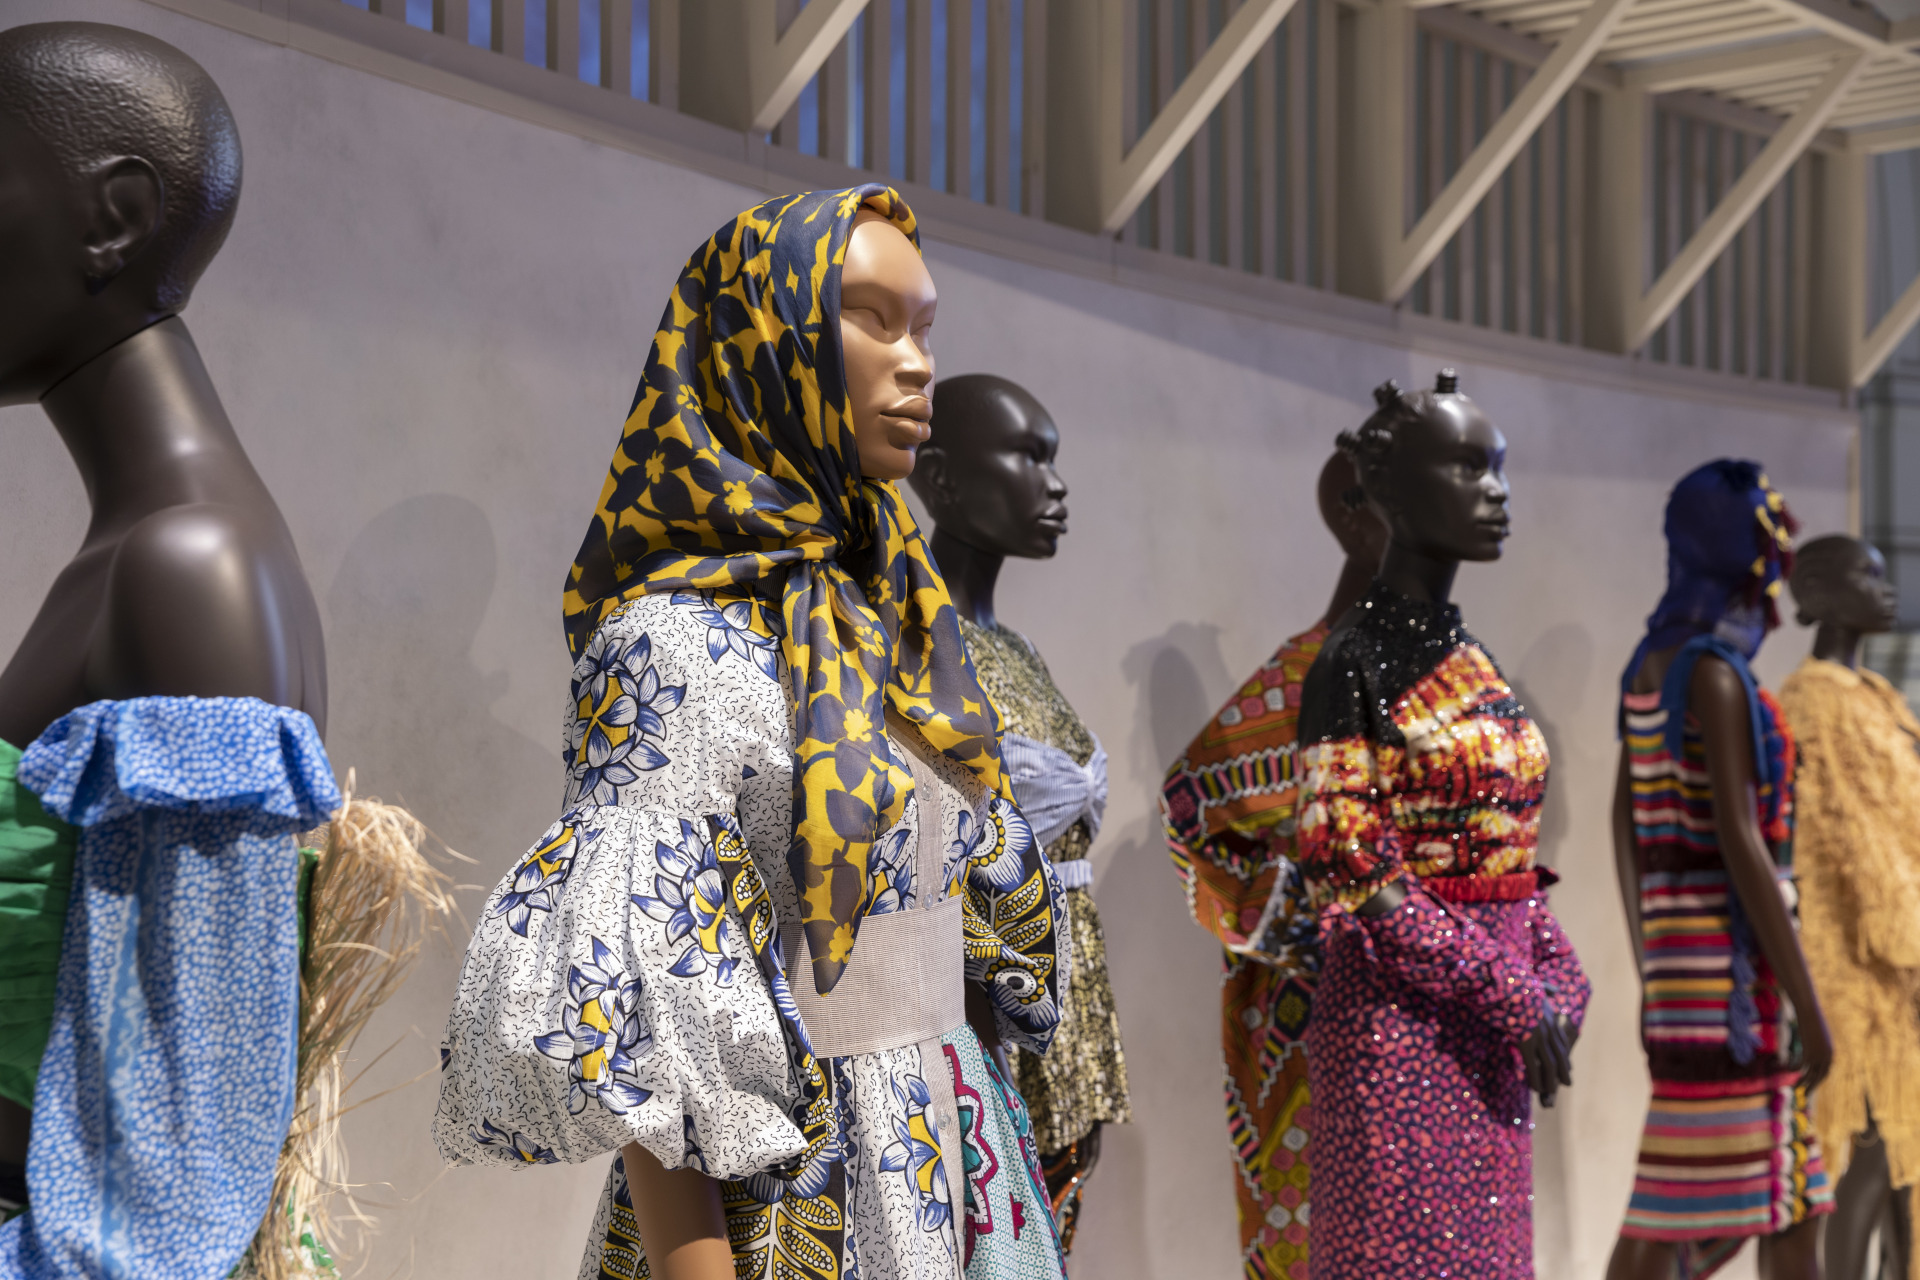 Mannequins lined up in display of contemporary African runway fashion